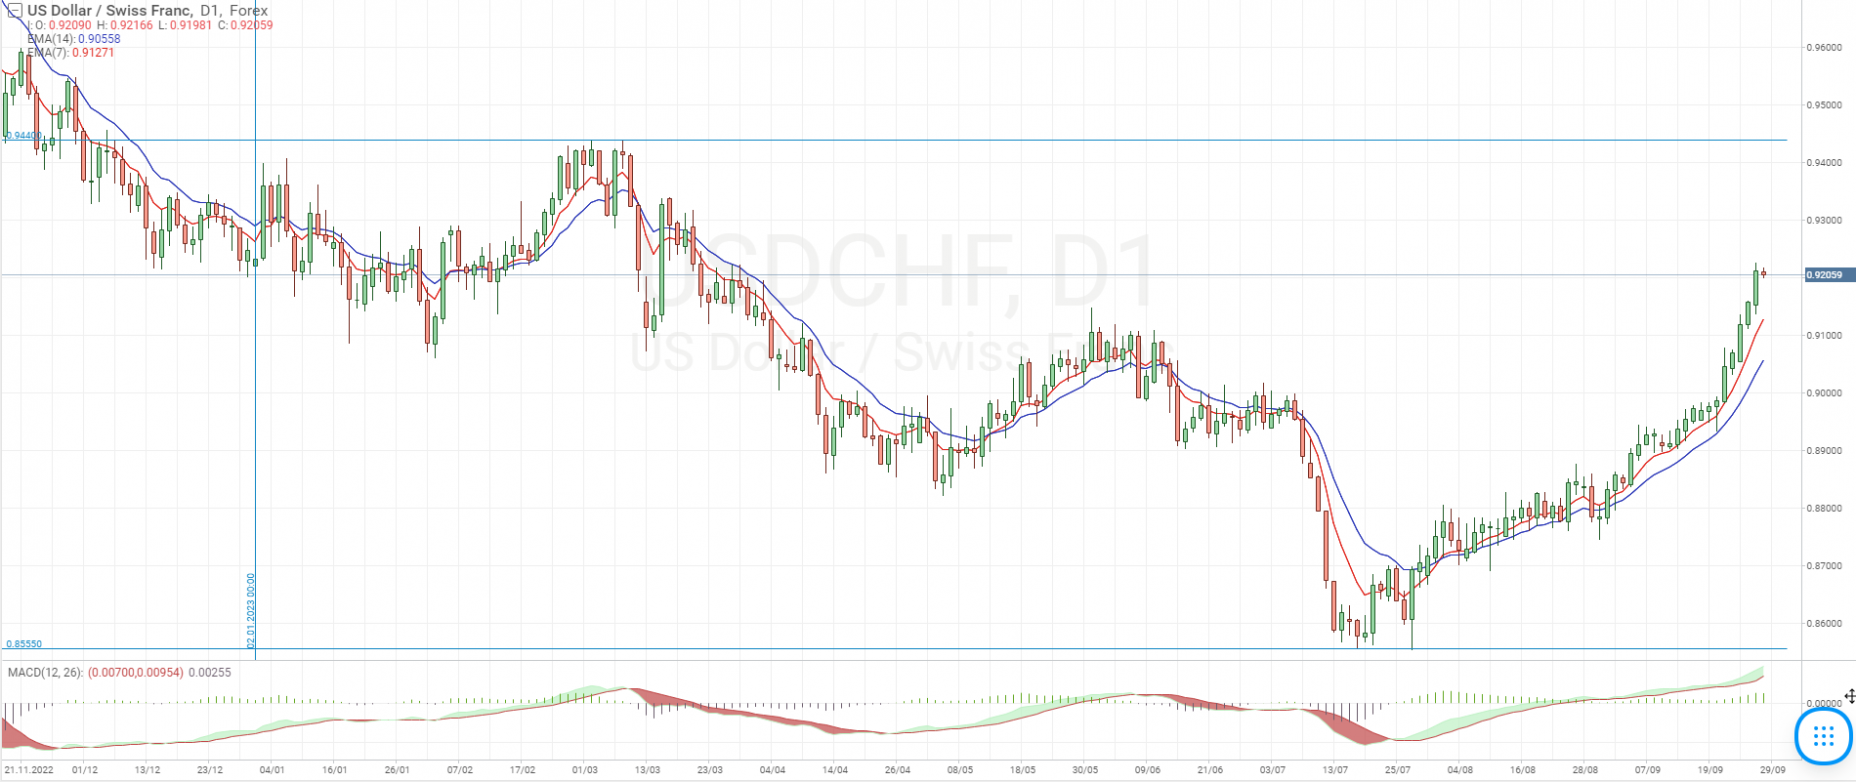 USD/CHF currency pair chart